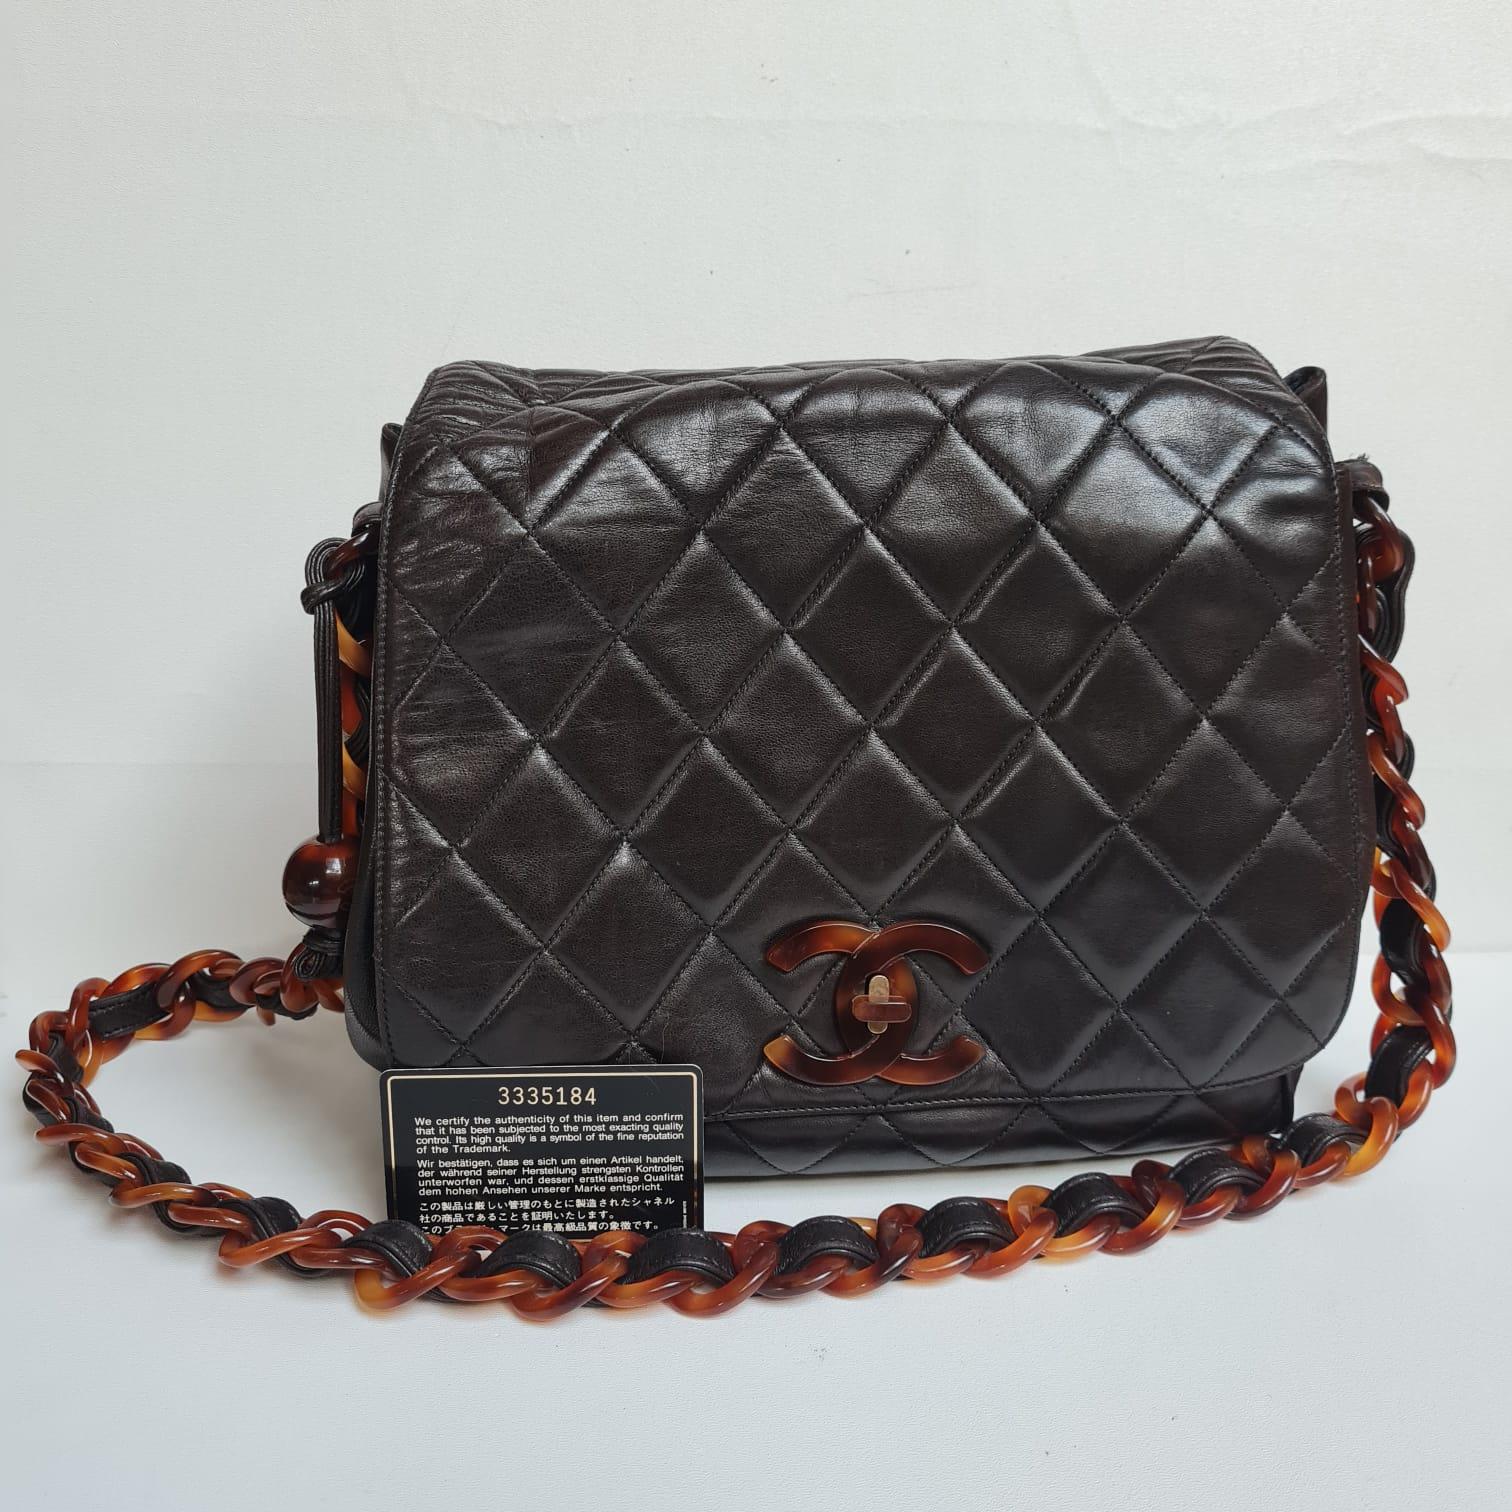 Rare vintage chanel bag with tortoiseshell clasp and chain detail. Still in great condition. Light scuffs and press marks on the exterior leather but nothing major. Tortoiseshell detail in good condition overall. Series #3. Comes with its card and